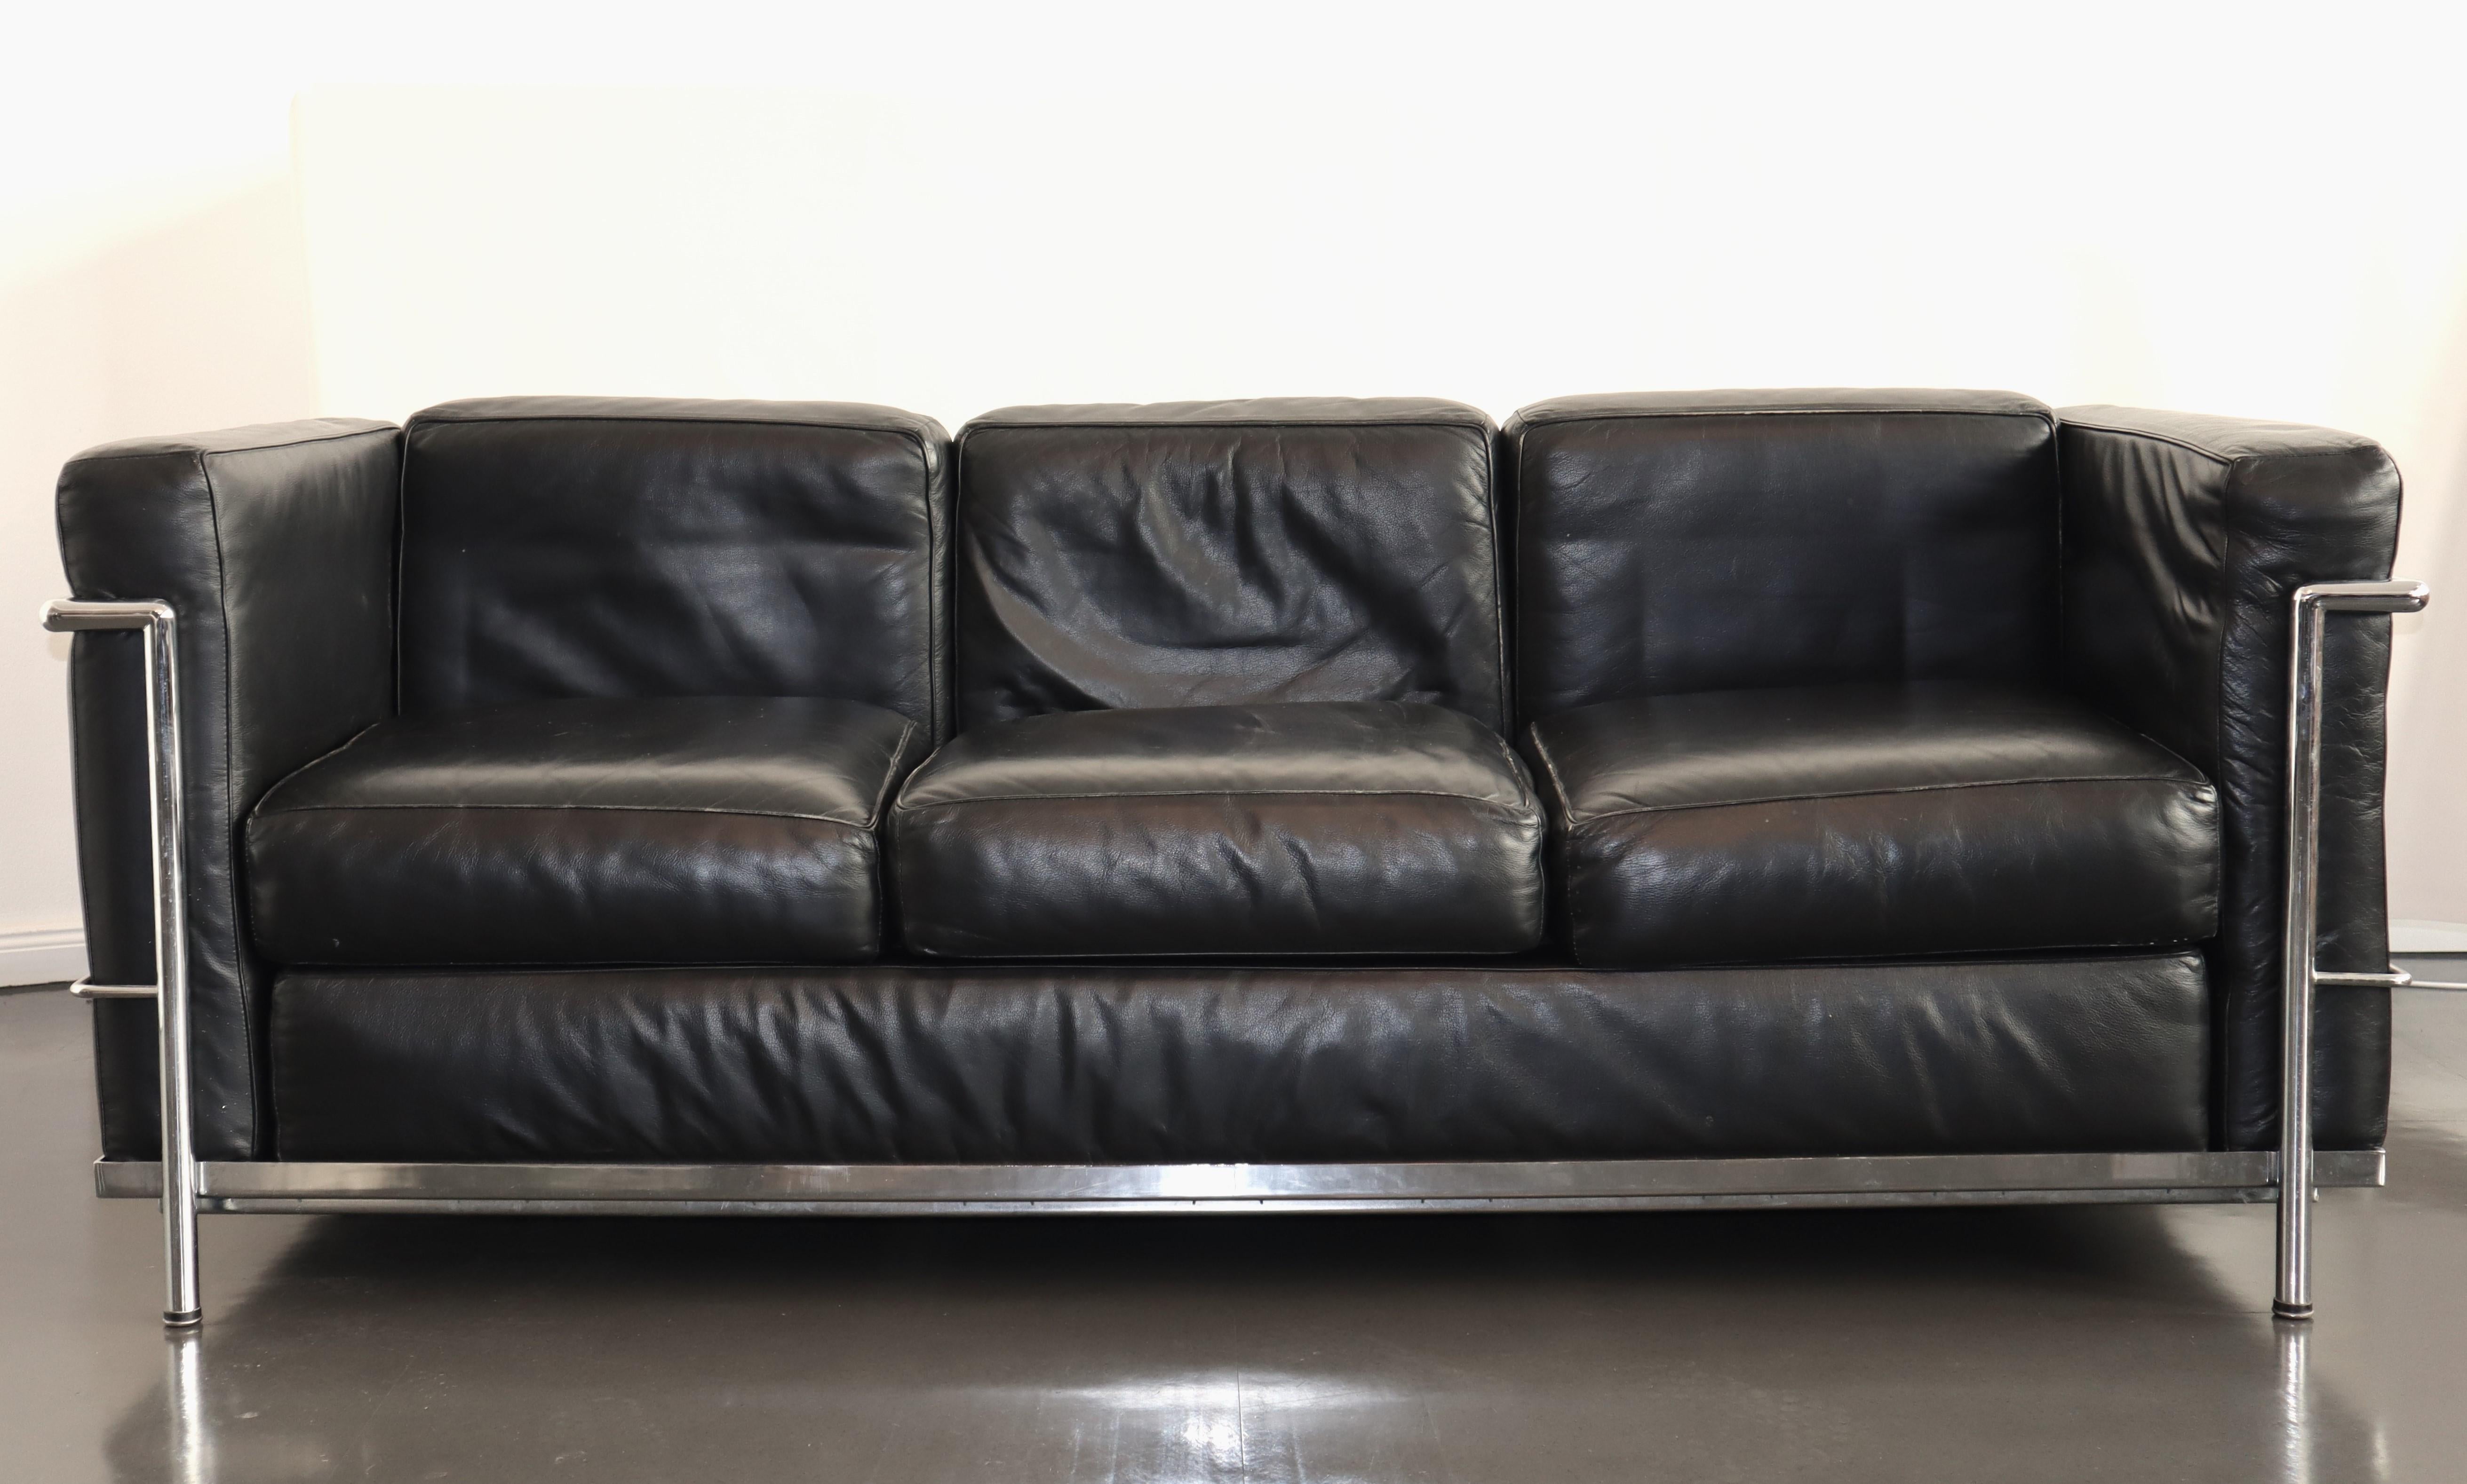 Timelessly iconic Le Corbusier LC2 set of 3-seater sofa and armchair in chrome tube steel and black leather. Made in Italy by Alivar, a highly collectible licensed / authorized producer before Cassina (1980s). Signed with Alivar repeat fabric